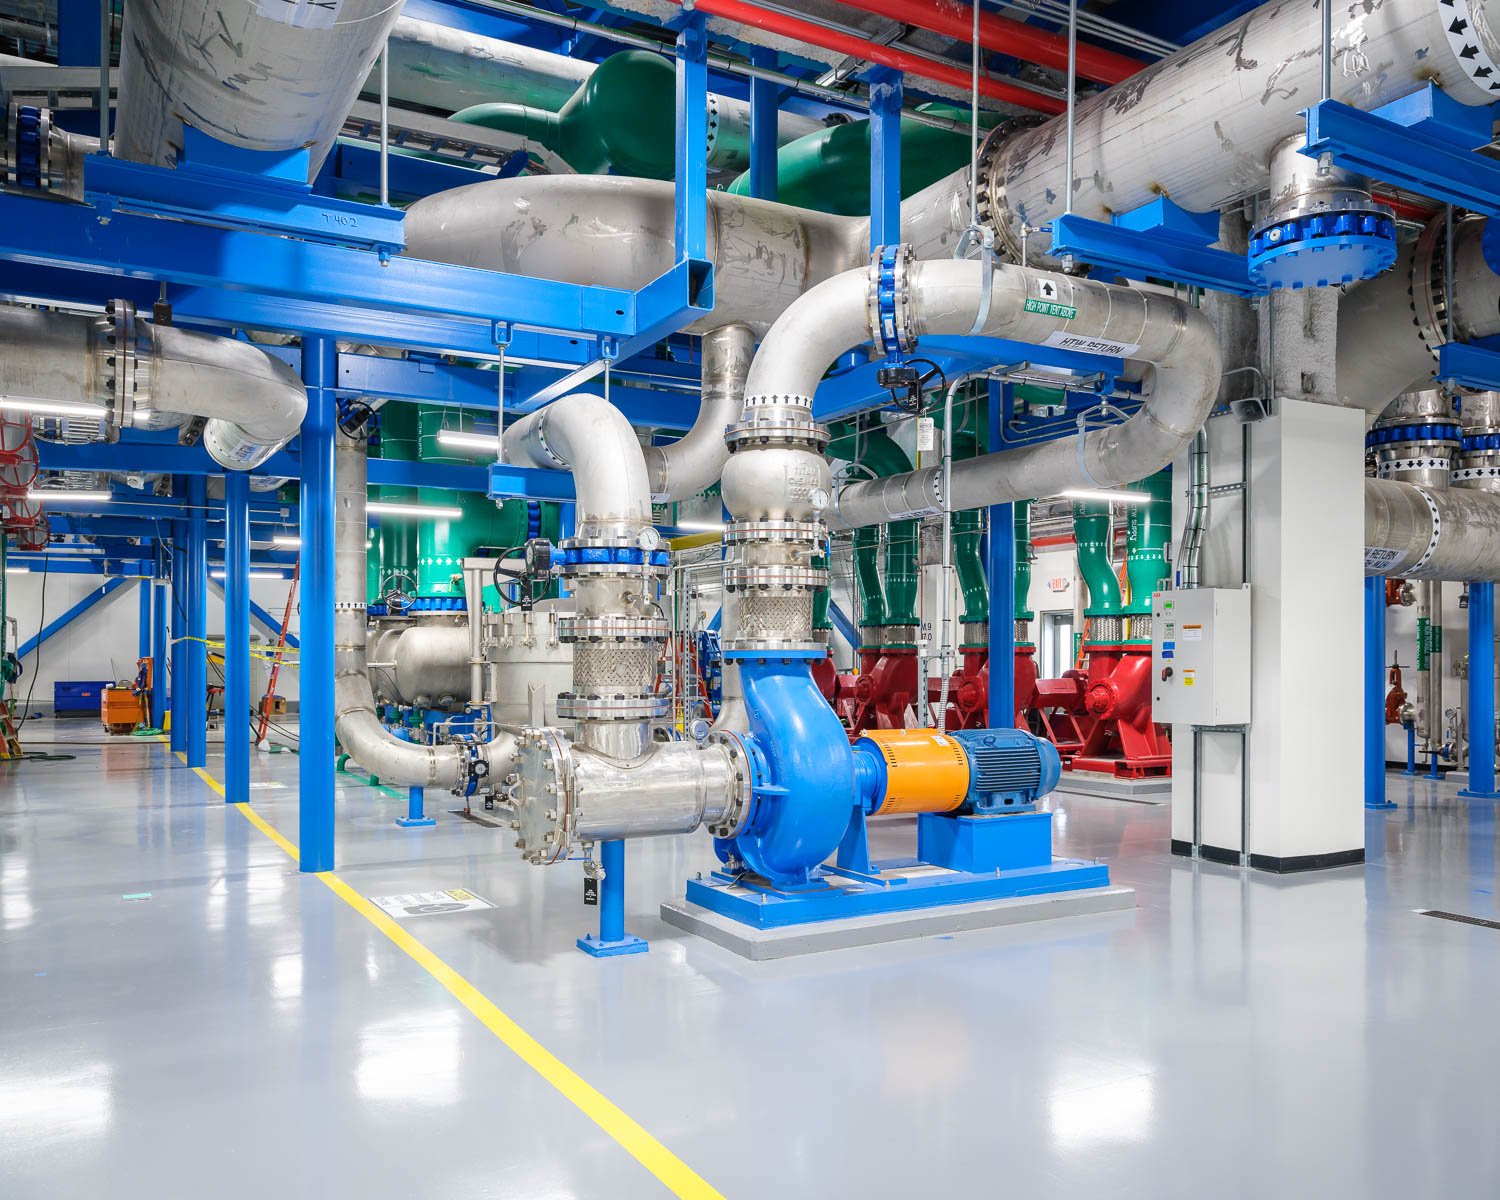  Cooling system for Frontier. To cool the system, ORNL constructed a new mechanical plant featuring a high-temperature (32°C) cooling water system with a total system volume of around 385,000 litres of water. Shown here is one of the 350-horsepower p